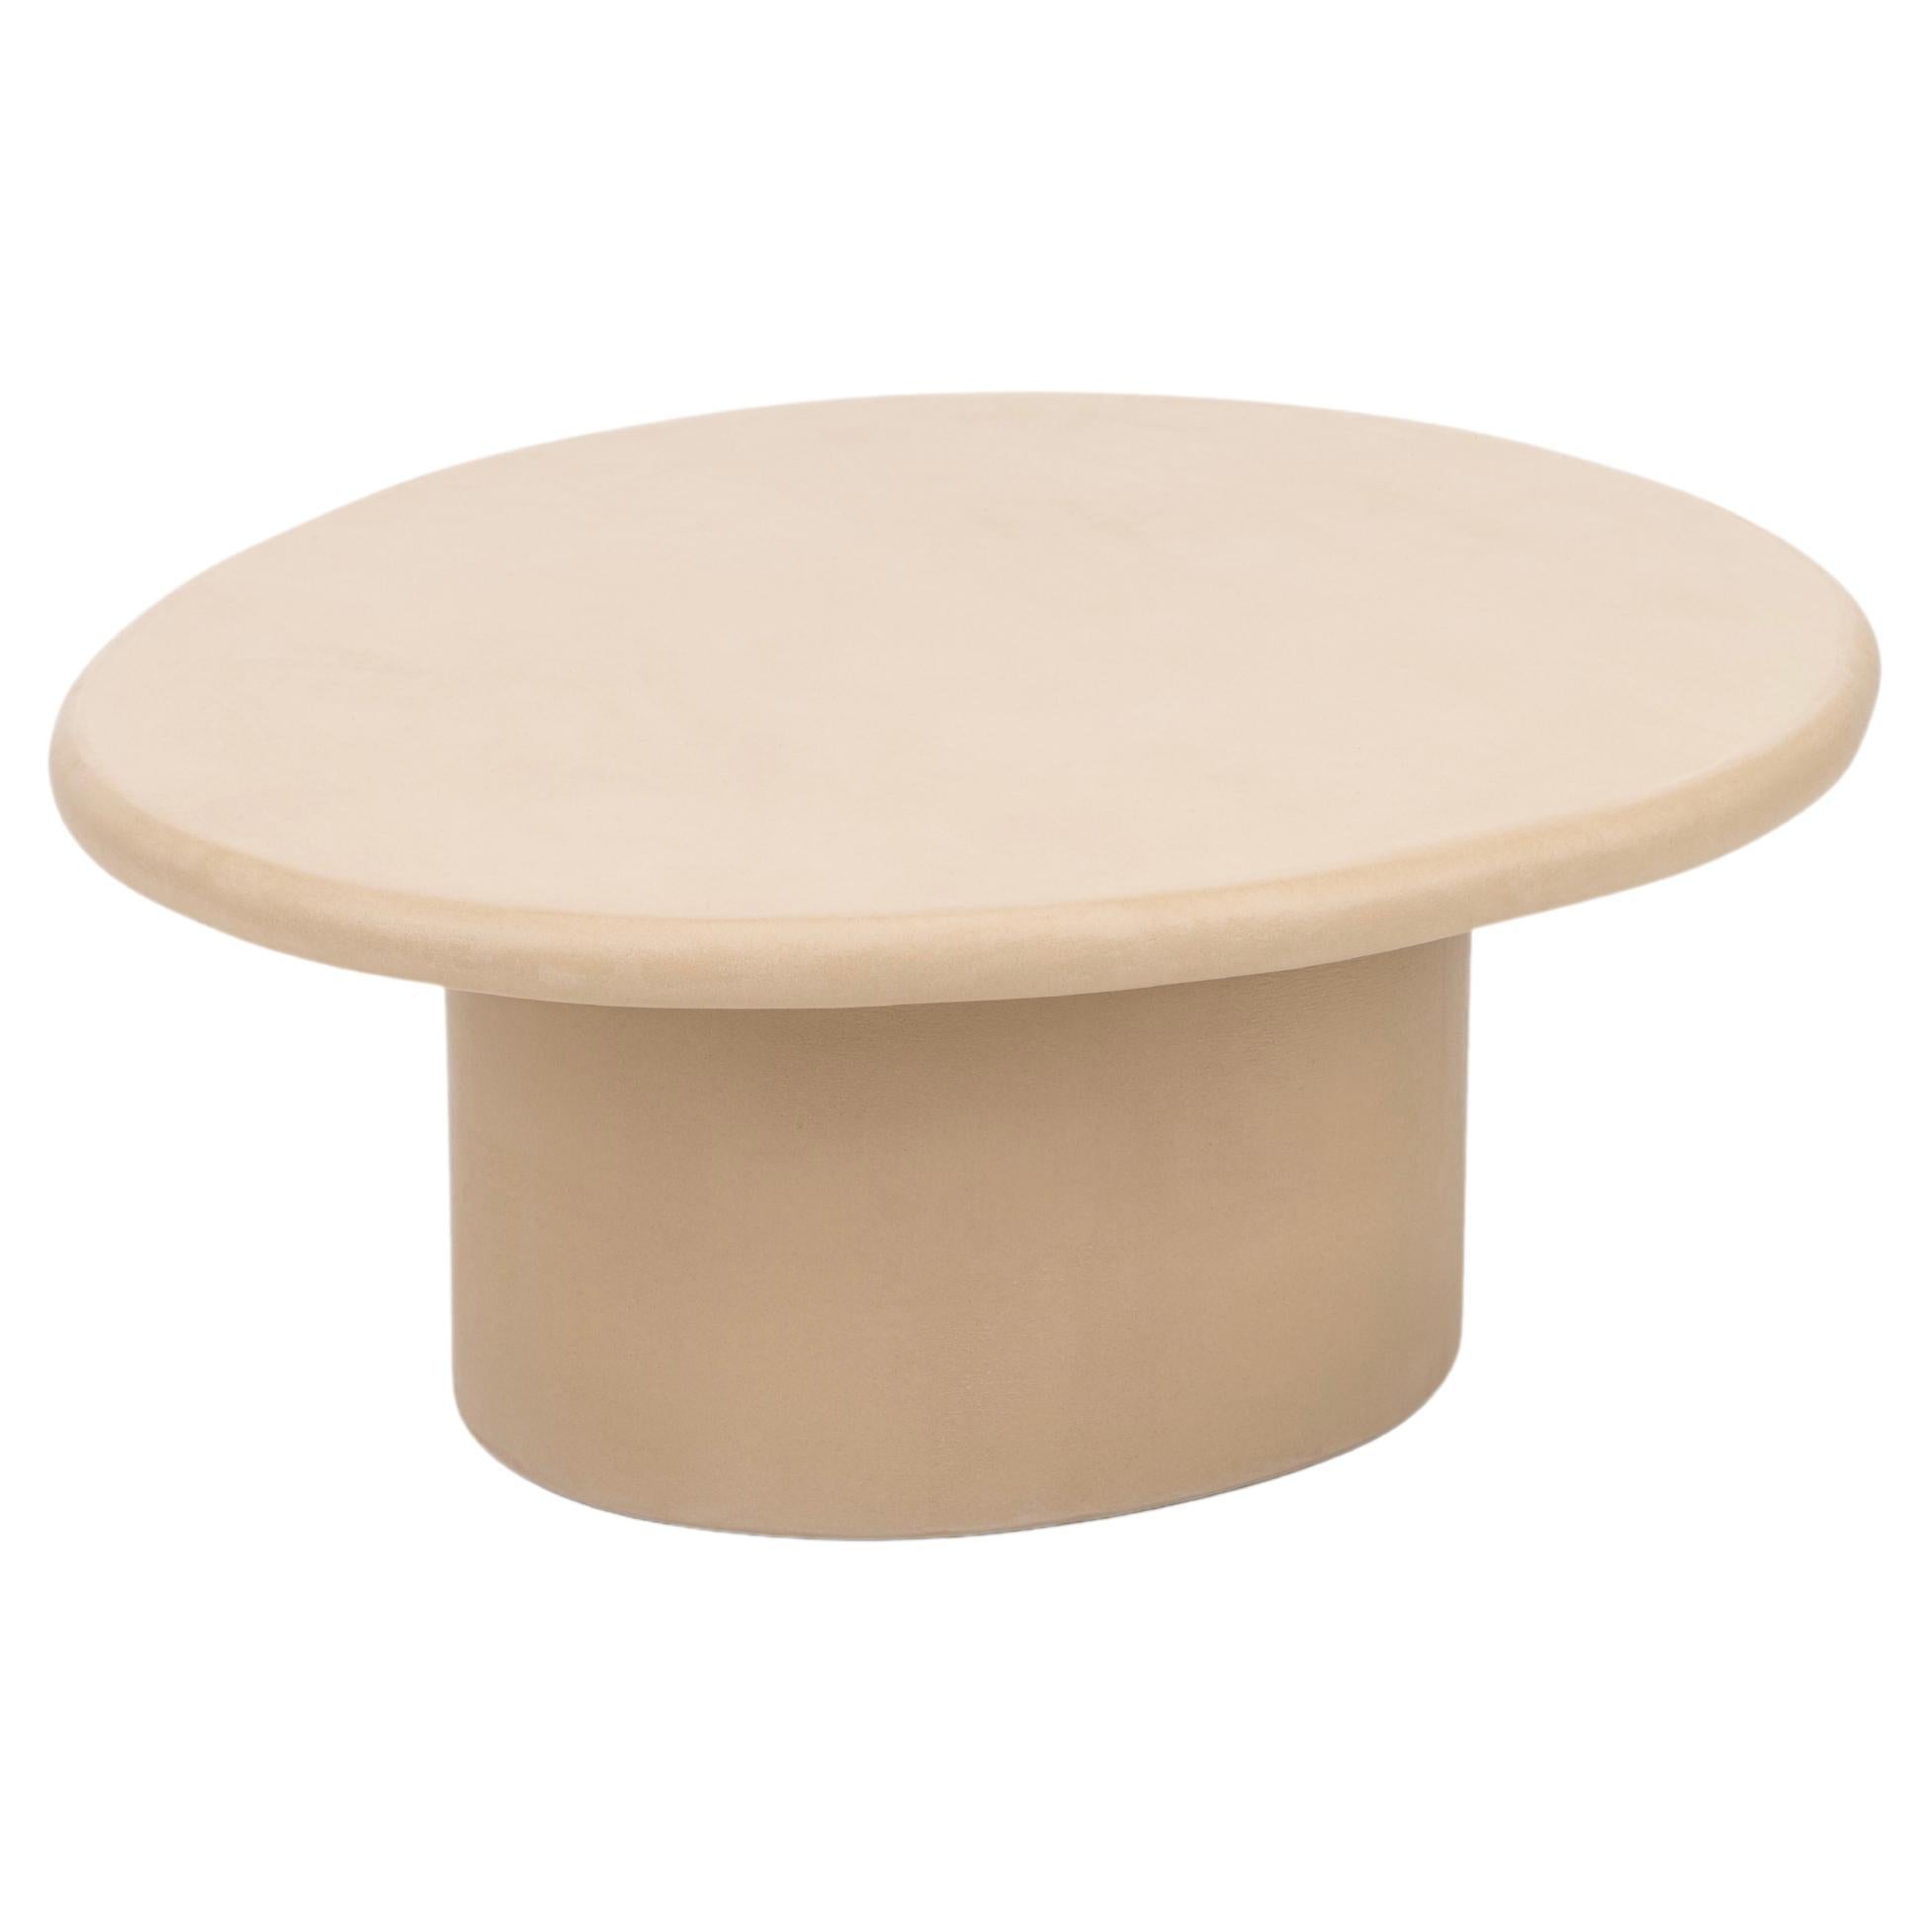 Organic Shaped Natural Plaster Coffee Table "Sami" by Isabelle Beaumont For Sale